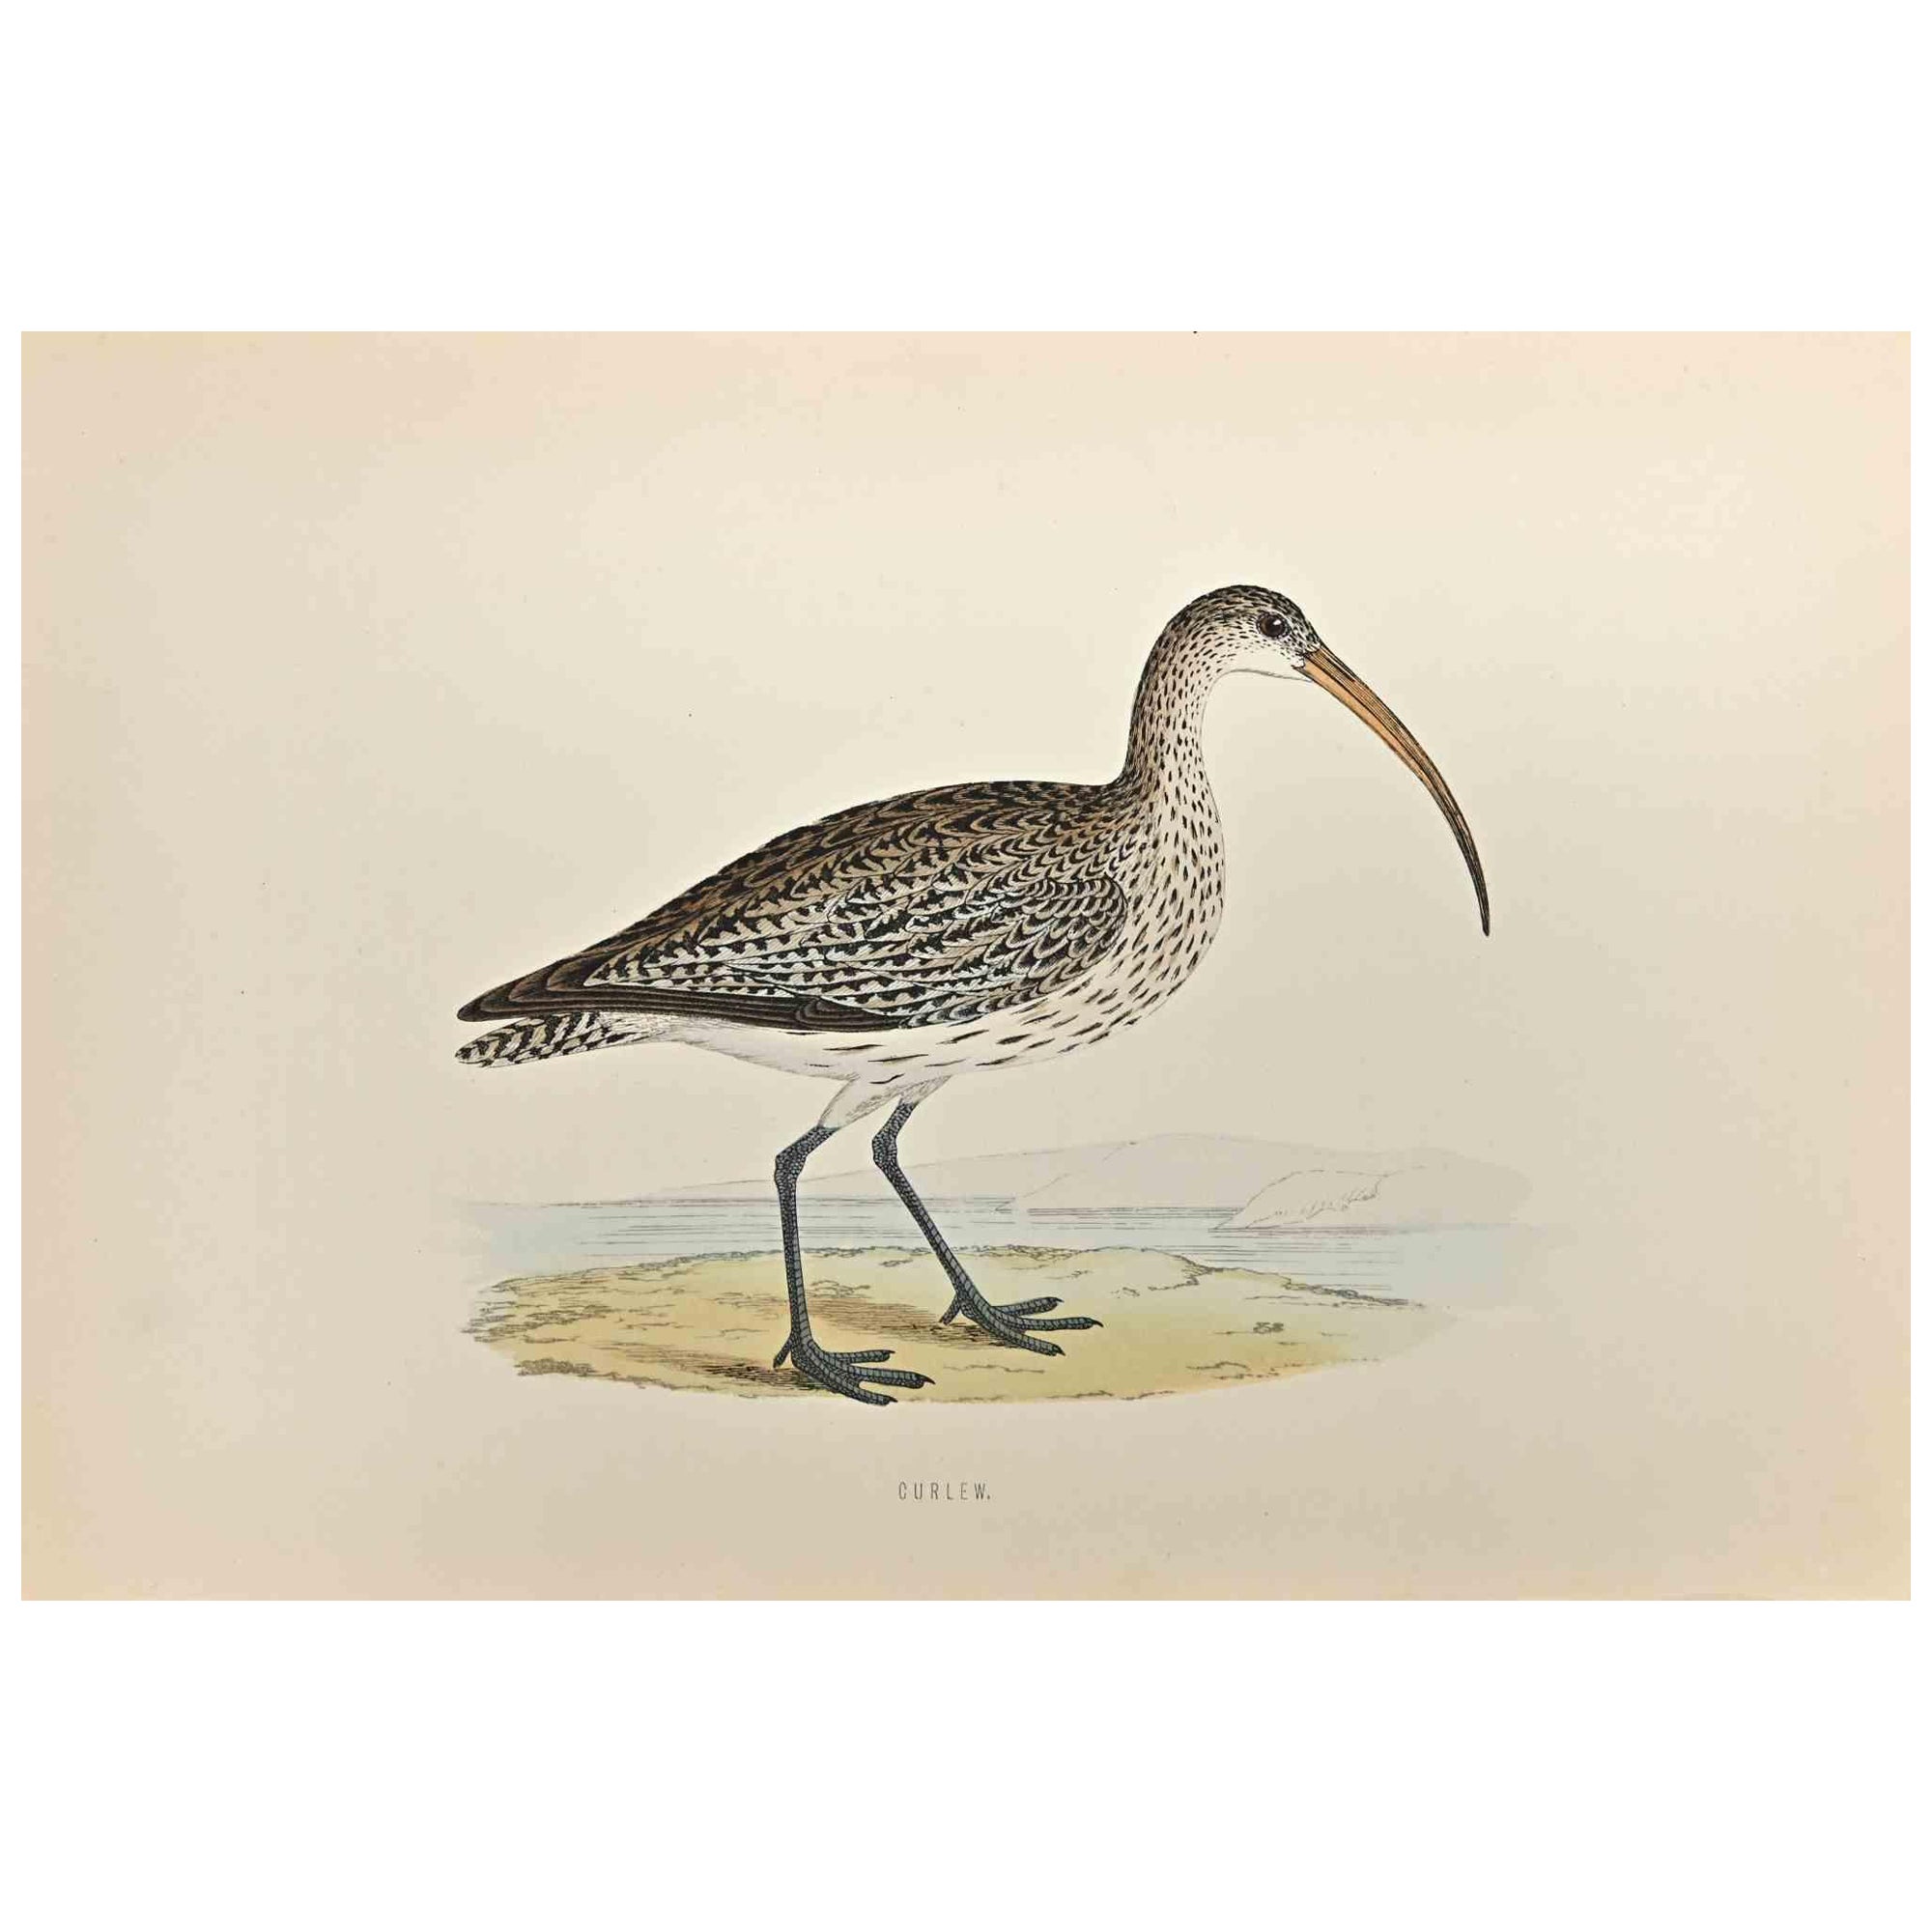 Curlew is a modern artwork realized in 1870 by the British artist Alexander Francis Lydon (1836-1917).

Woodcut print on ivory-colored paper.

Hand-colored, published by London, Bell & Sons, 1870.  

The name of the bird is printed on the plate.